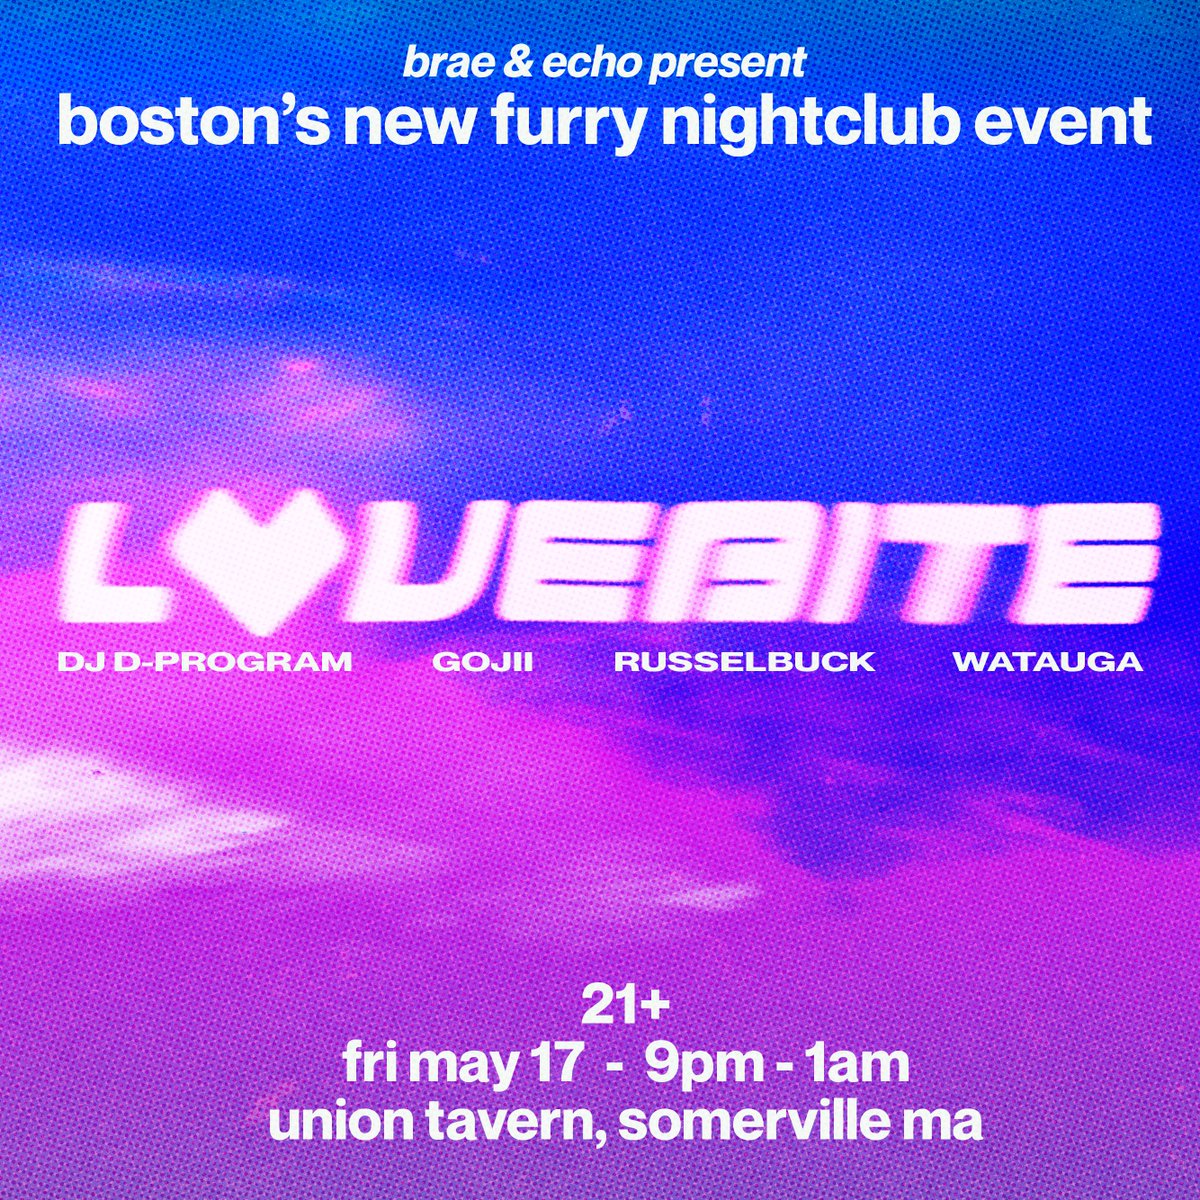 ATTENTION BOSTON & THE NORTHEAST we are vibrating with excitement and proud to announce our DEBUT EVENT on FRIDAY MAY 17 featuring sets from @aussa_ @GOJIIMUSIC @russelbuck @watauga_ stay tuned for site & tg group launch + poster and visuals xoxo @echocanidae & @braeburned 💜